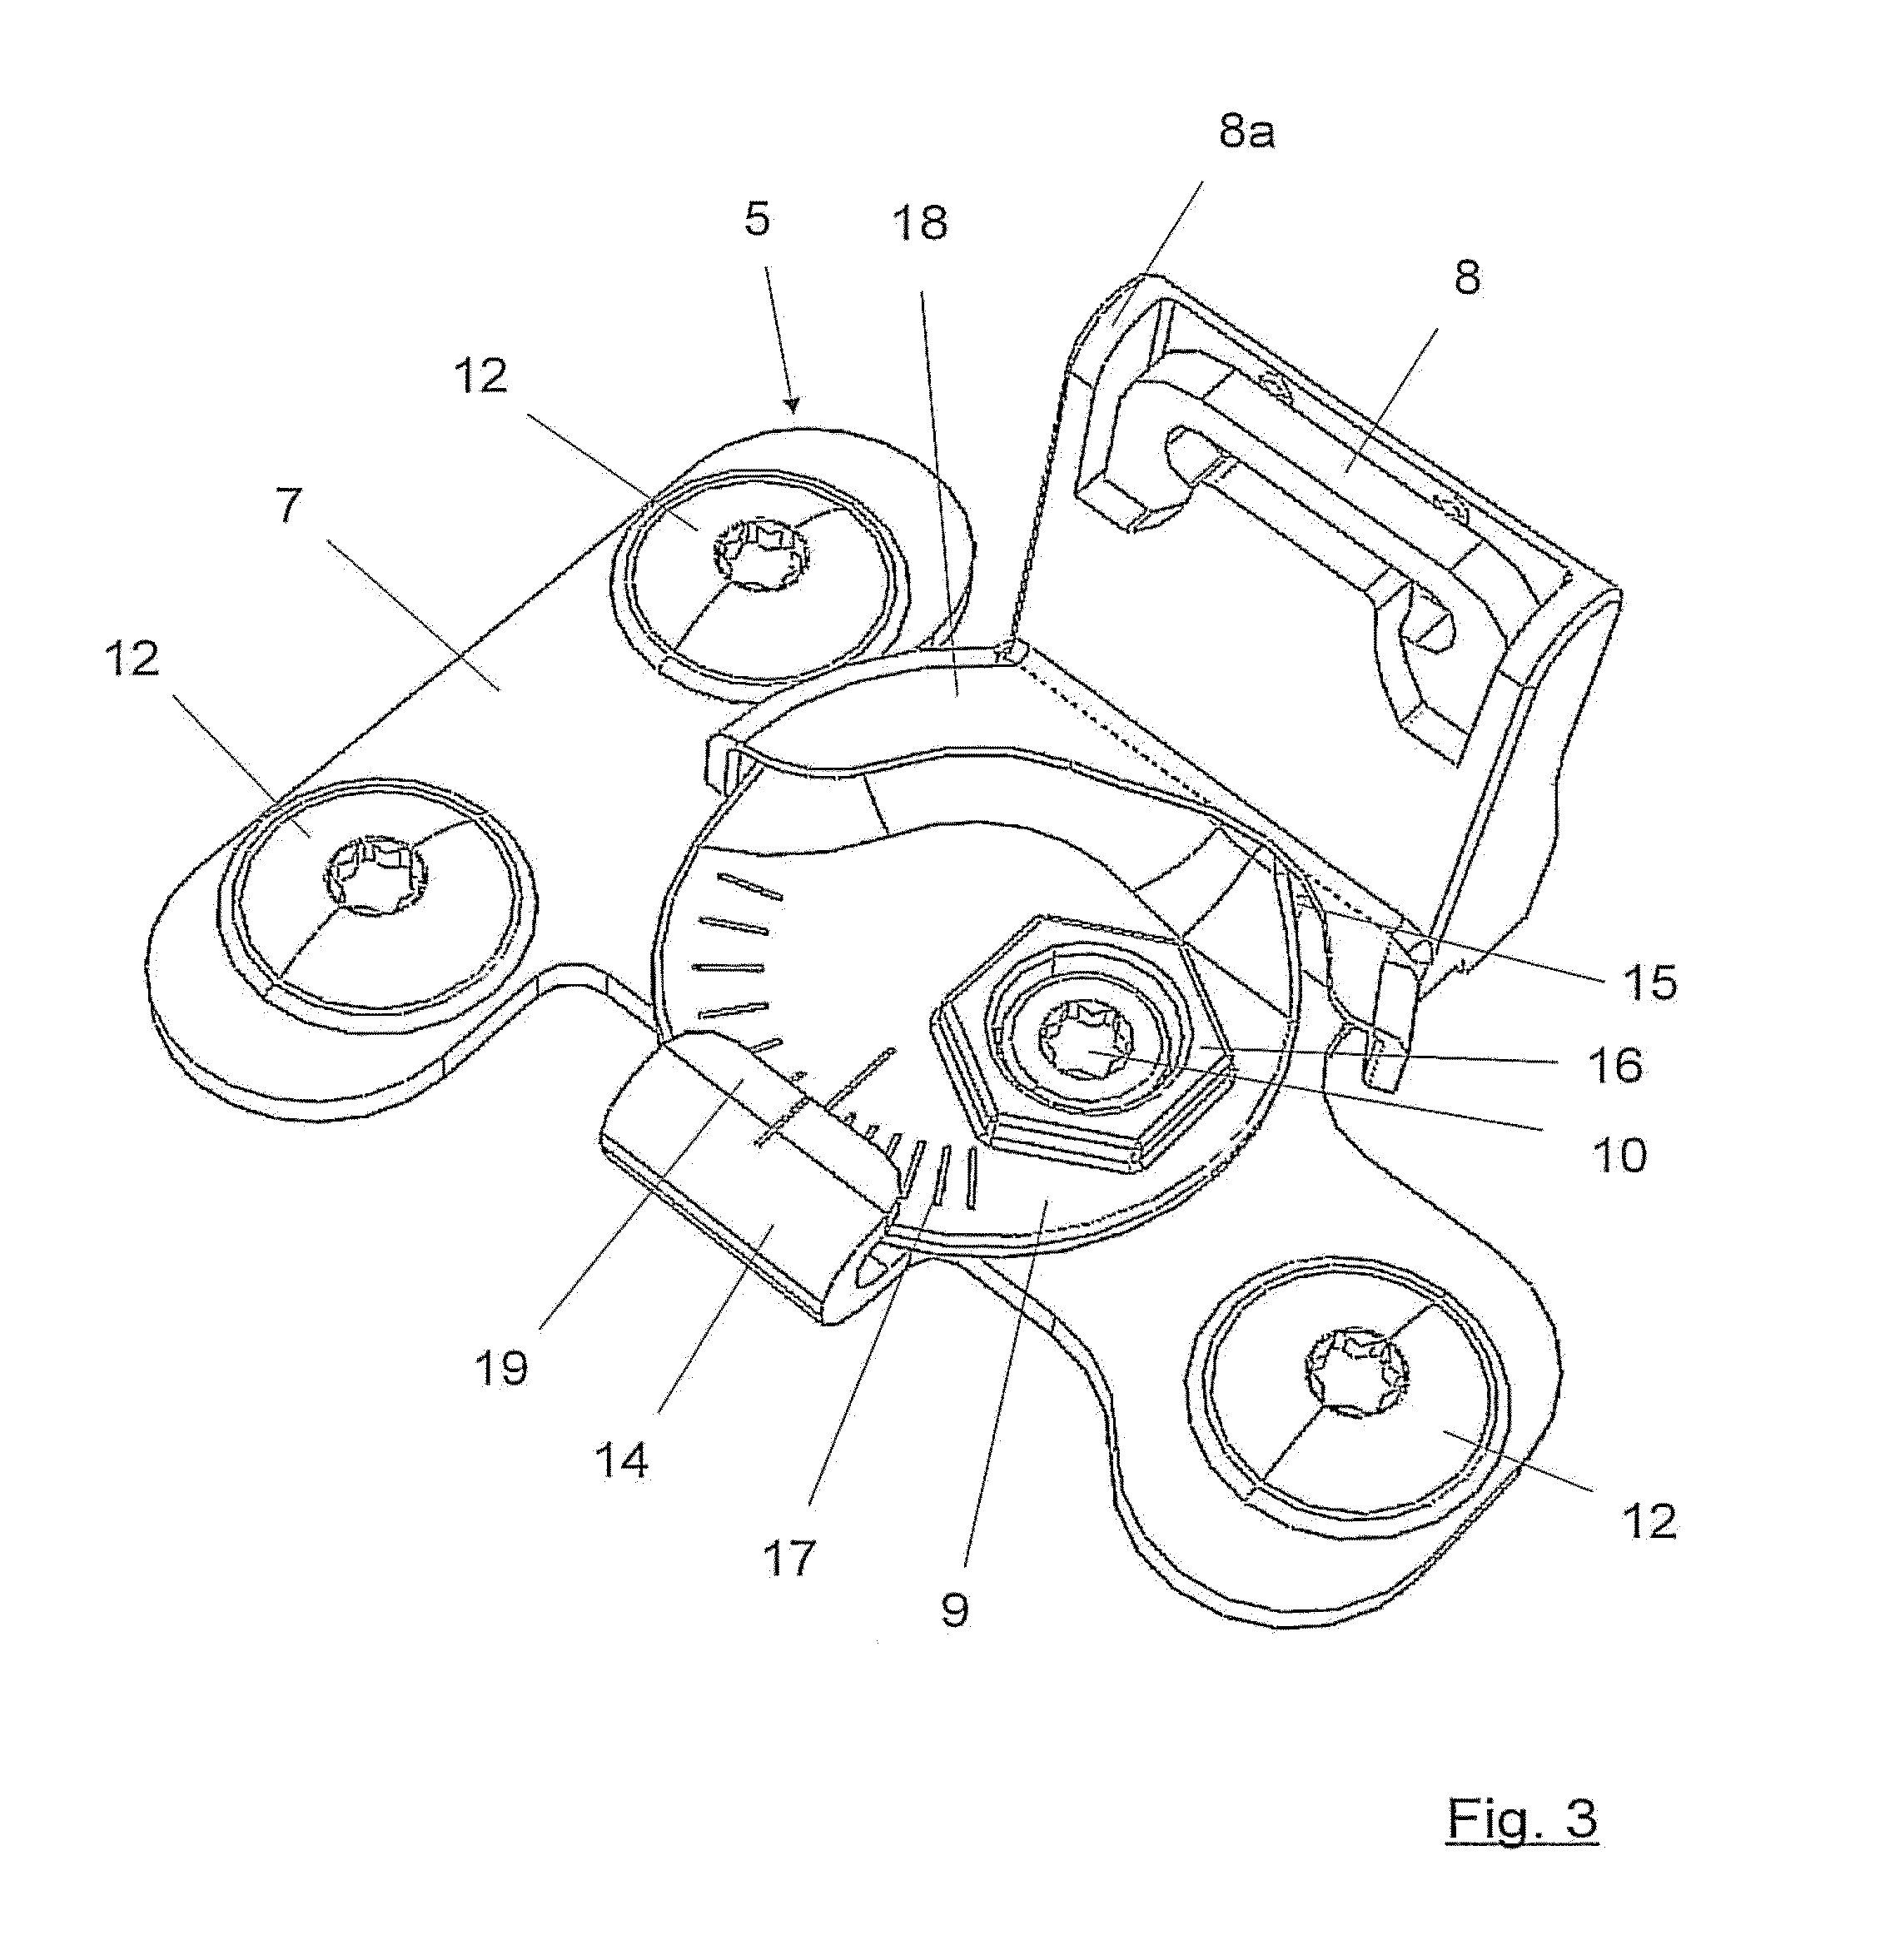 Device for fixing the position of a lid